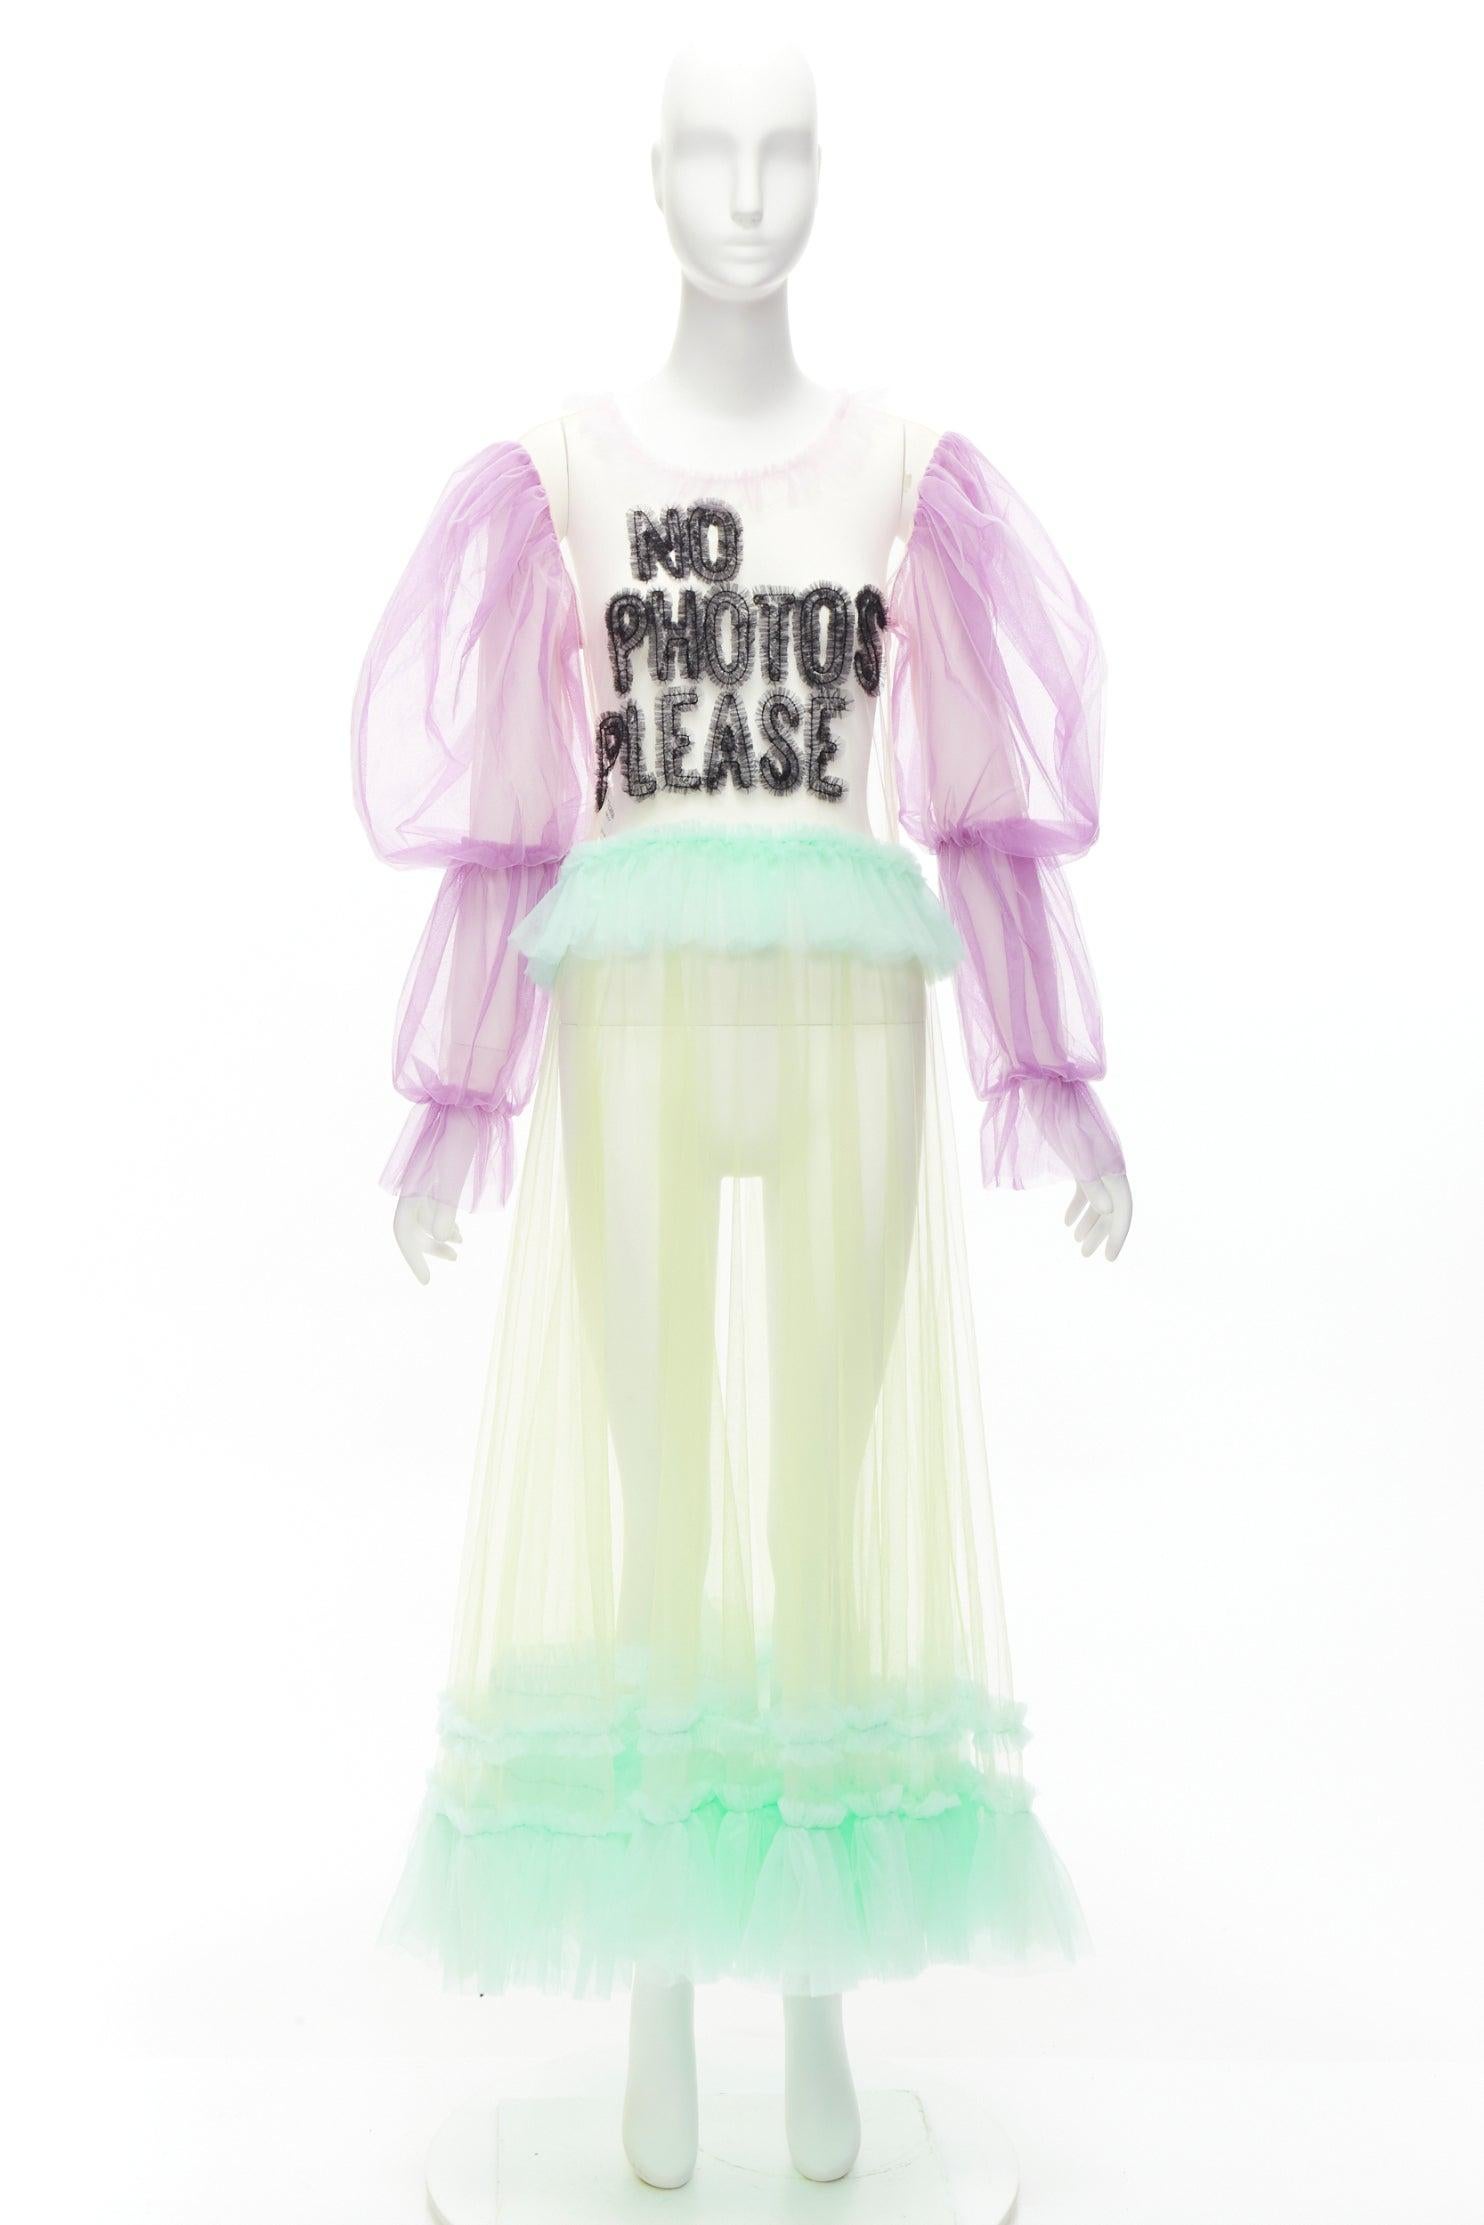 VIKTOR ROLF 2019 TULLE No Photos Please ruffle pastel puff sleeves sheer dress M For Sale 4